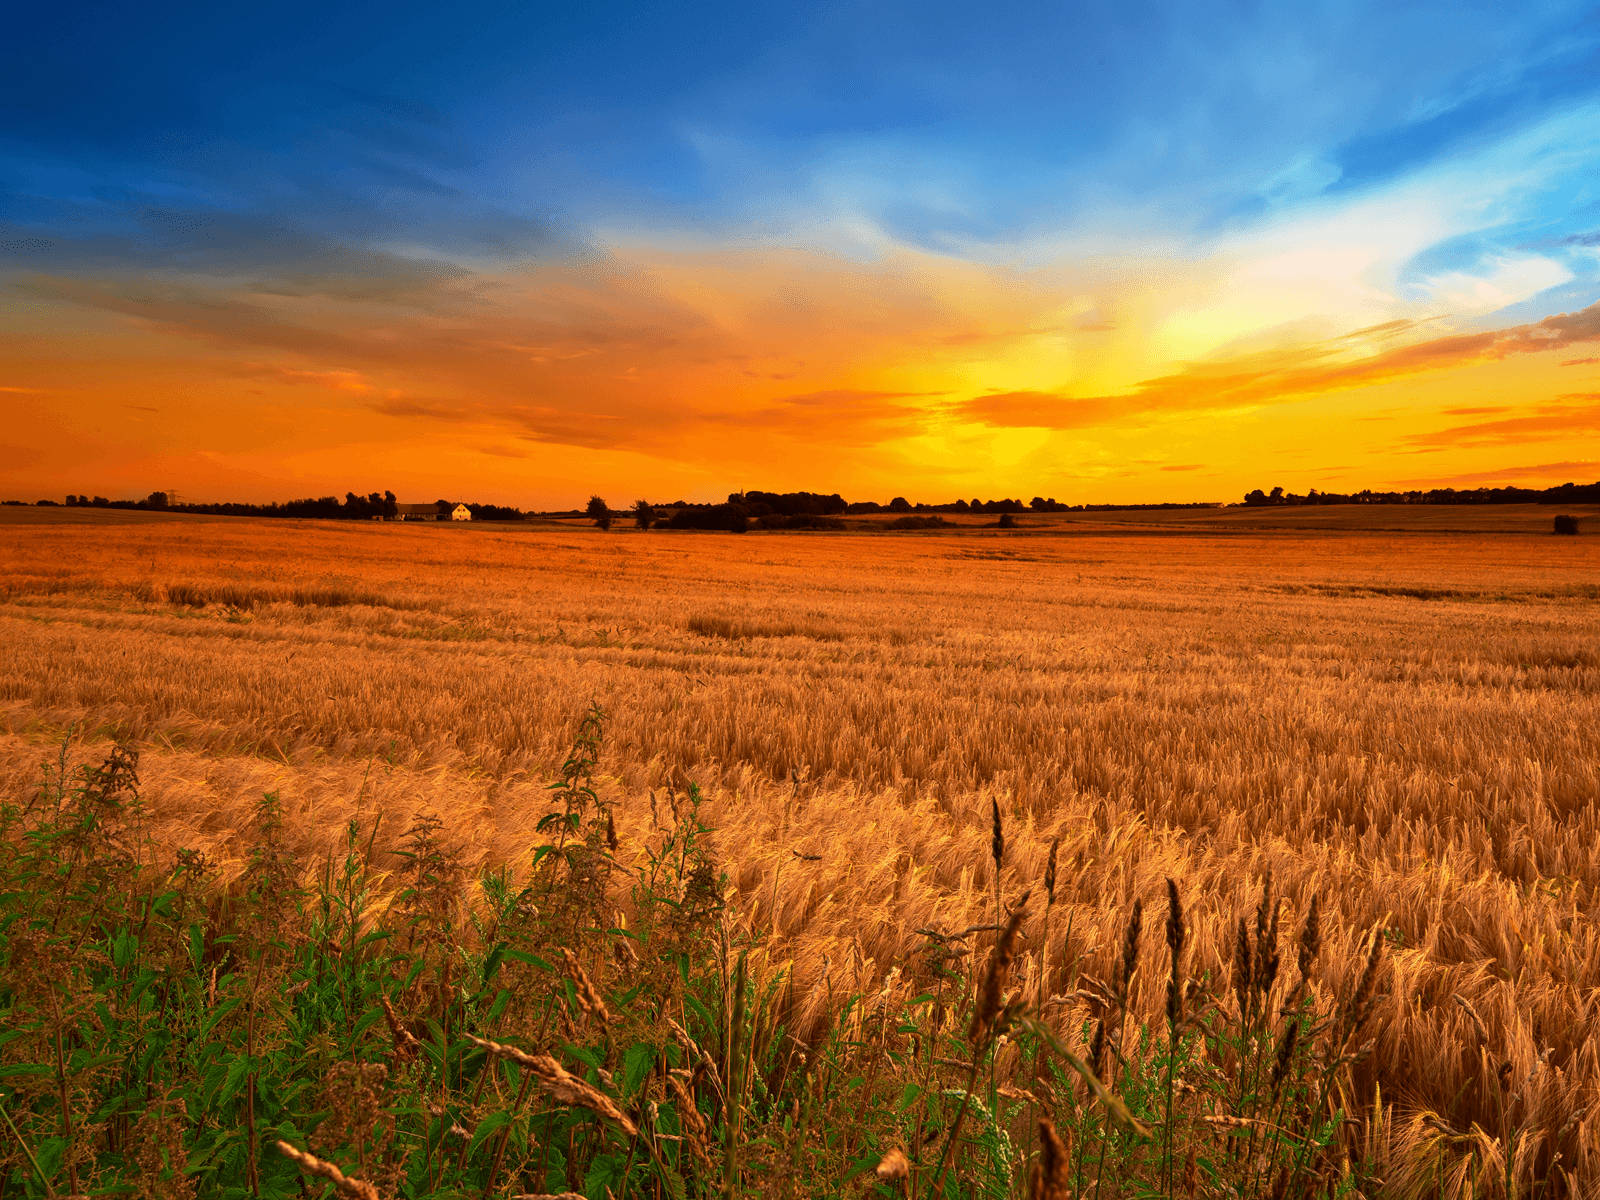 "Gorgeous Sunset in a Country Wheat Field" Wallpaper